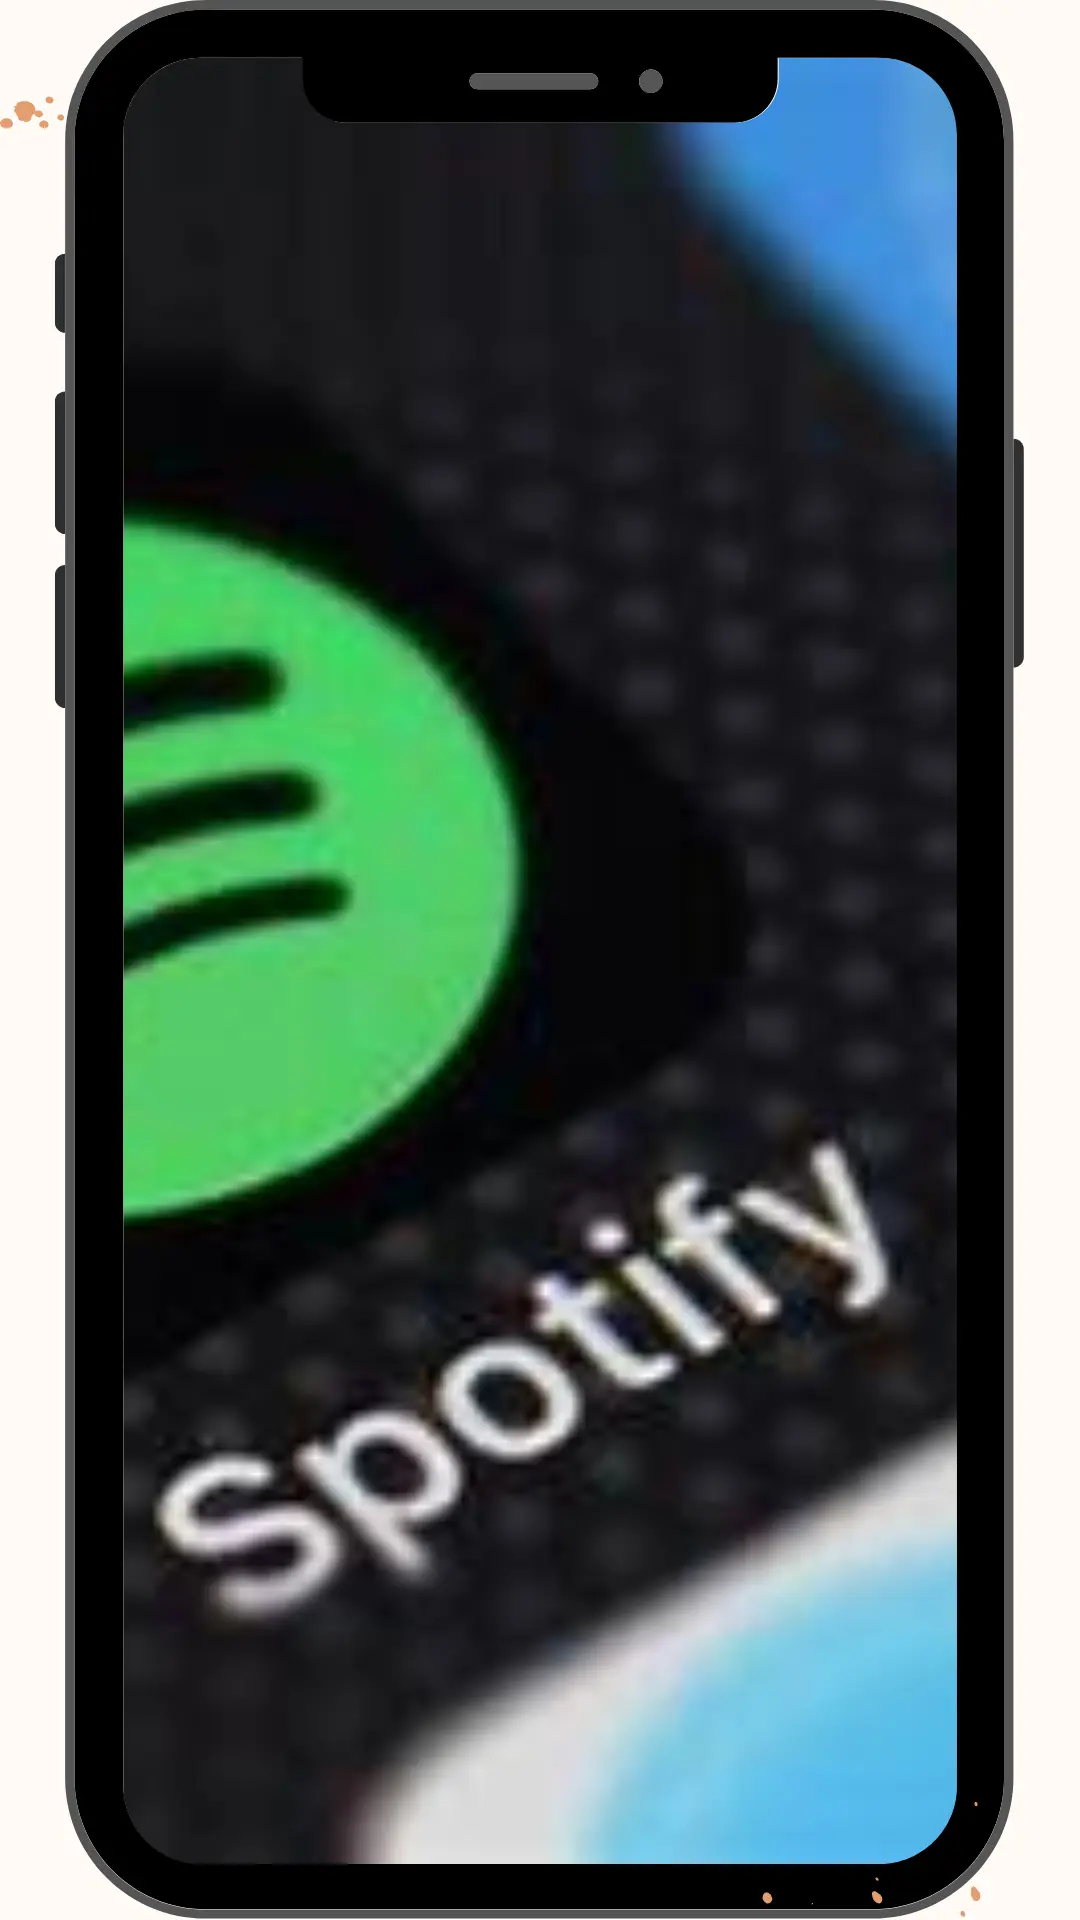 Spotify Specifications